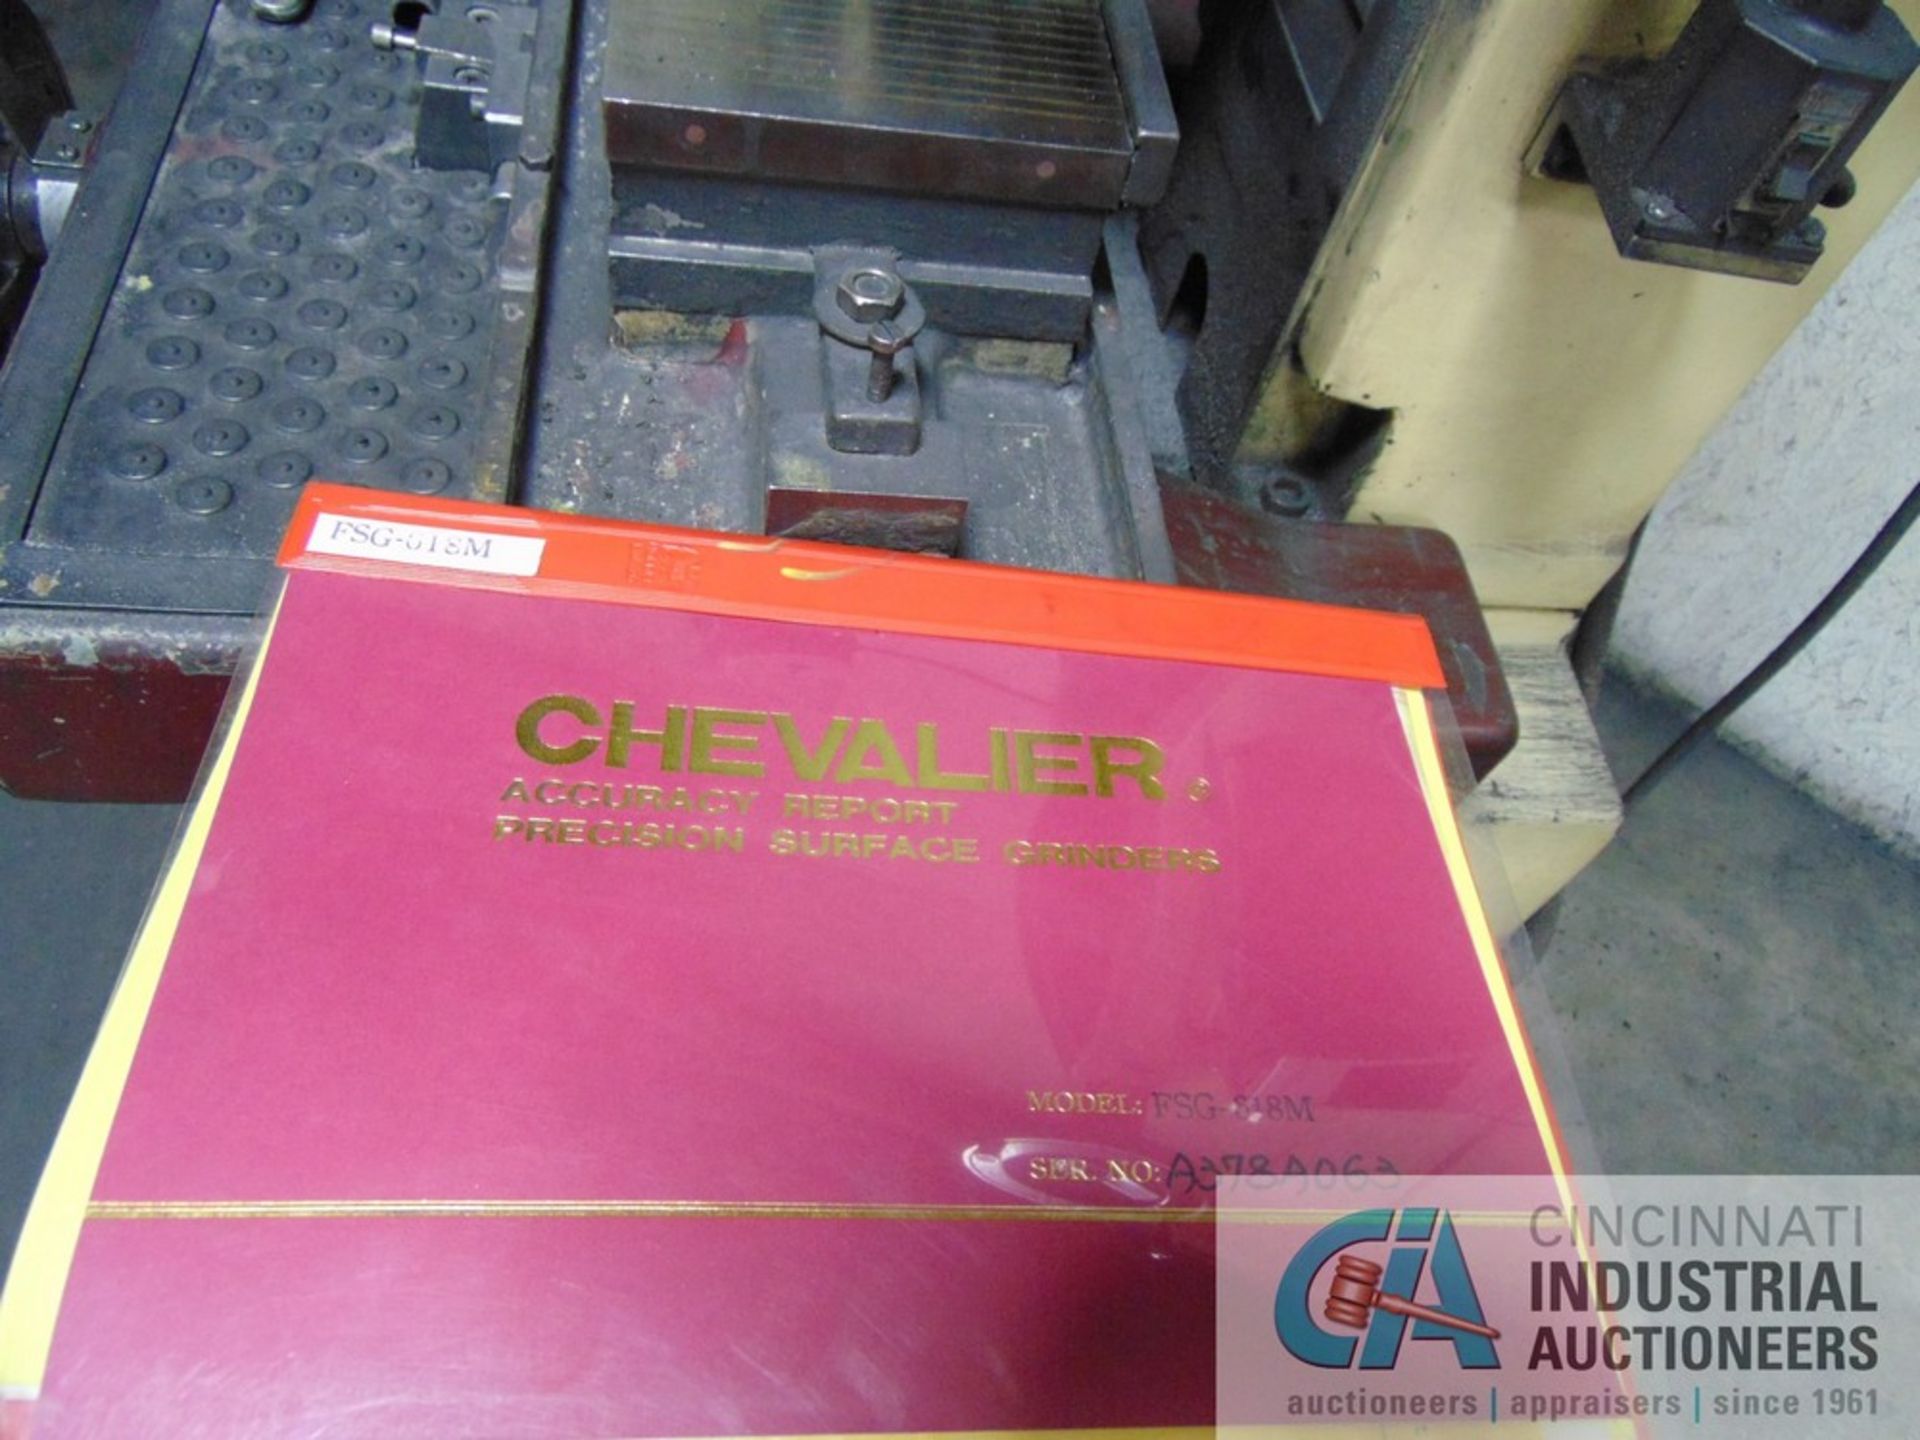 6" X 18" CHEVALIER MODEL FSG-618M HAND FEED SURFACE GRINDER; S/N A378A063 - Image 5 of 5